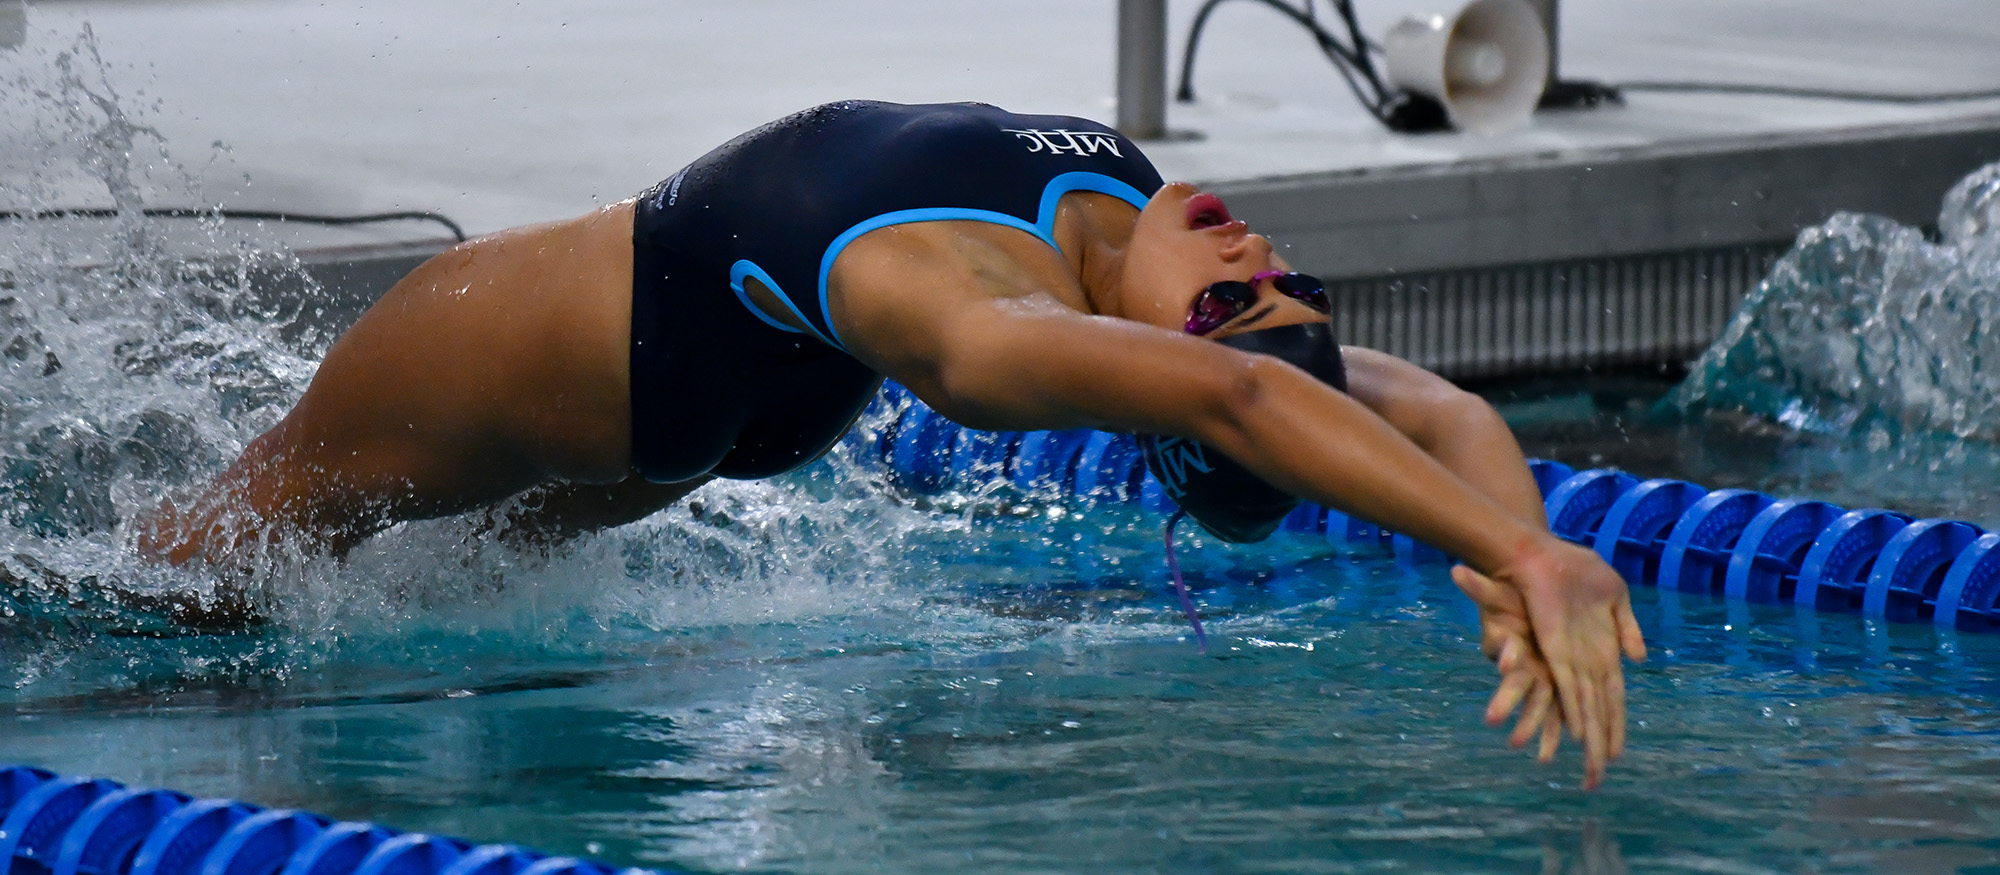 image of an MHC swimmer at the start of the backstroke